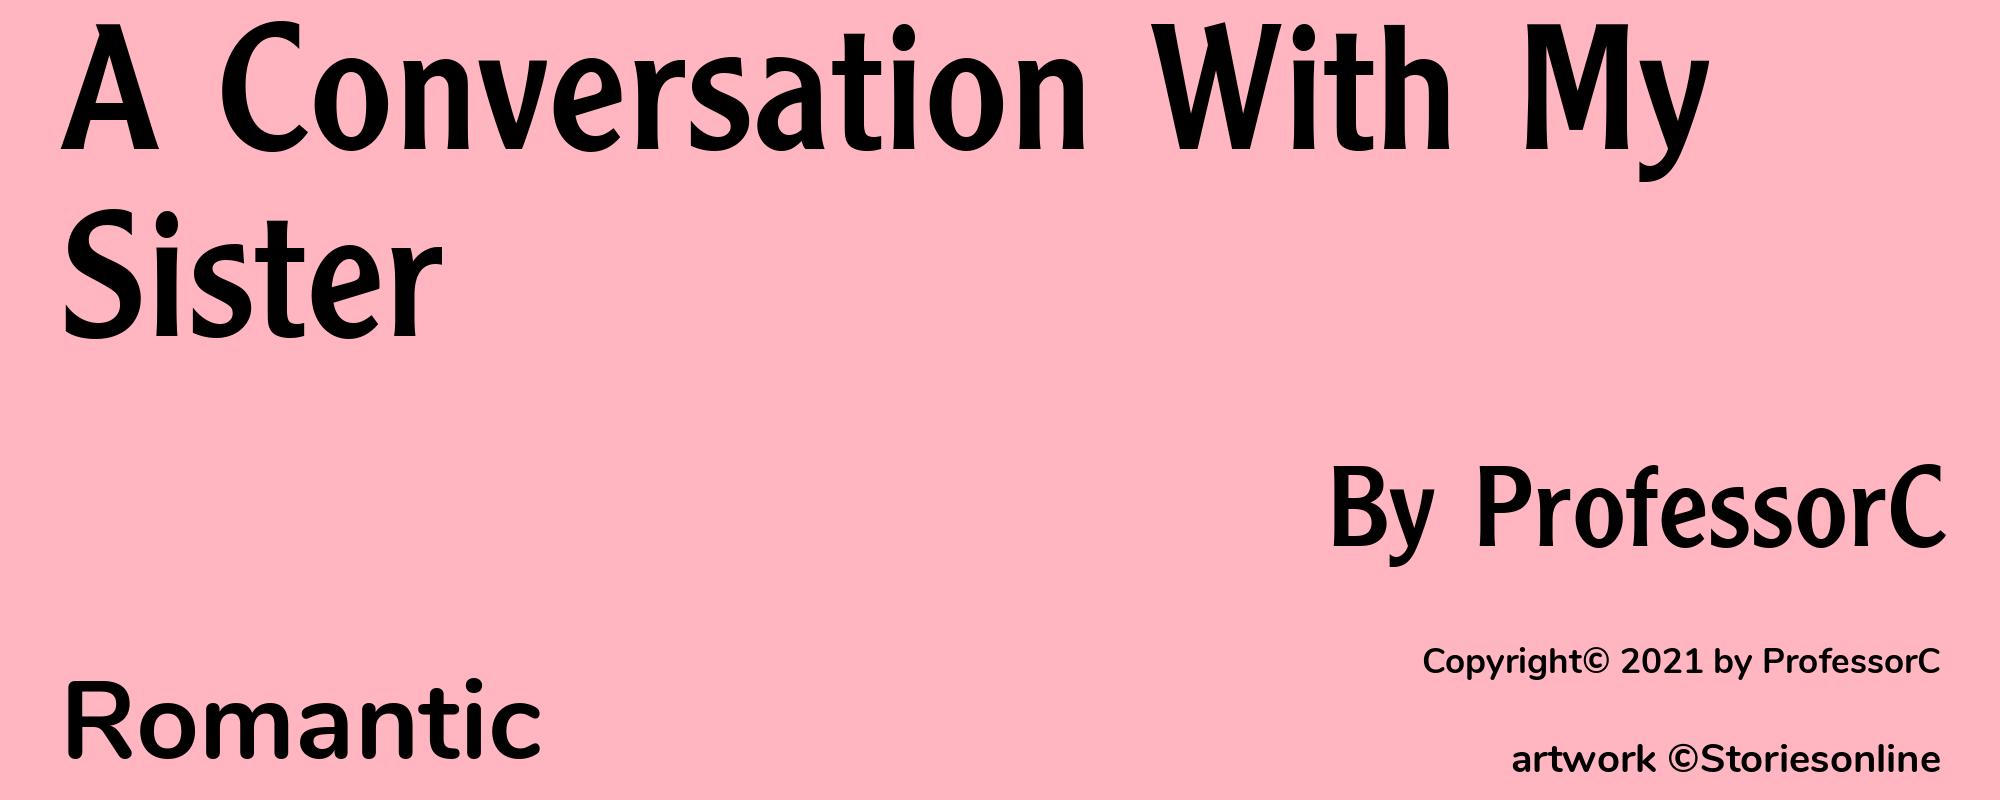 A Conversation With My Sister - Cover